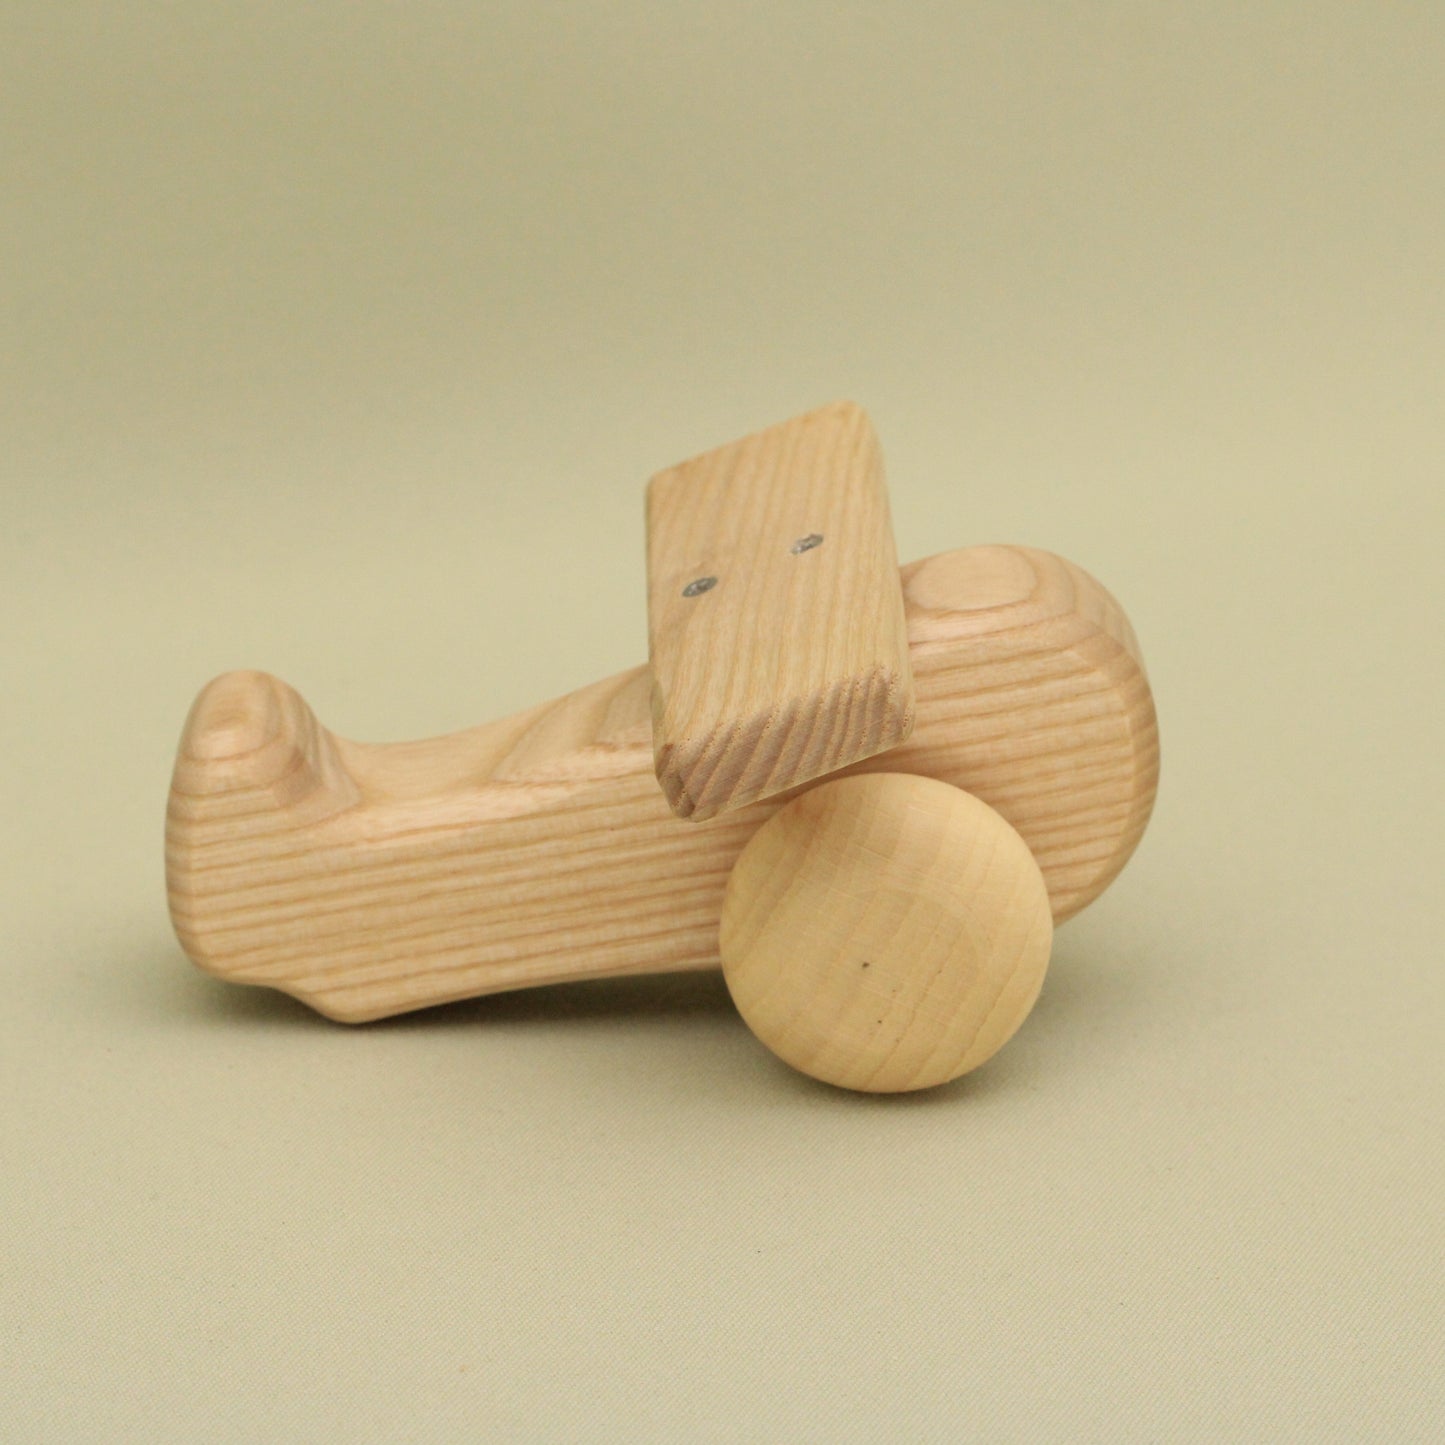 Lotes Toys Wooden Eco Friendly Natural Toy Airplane DC15